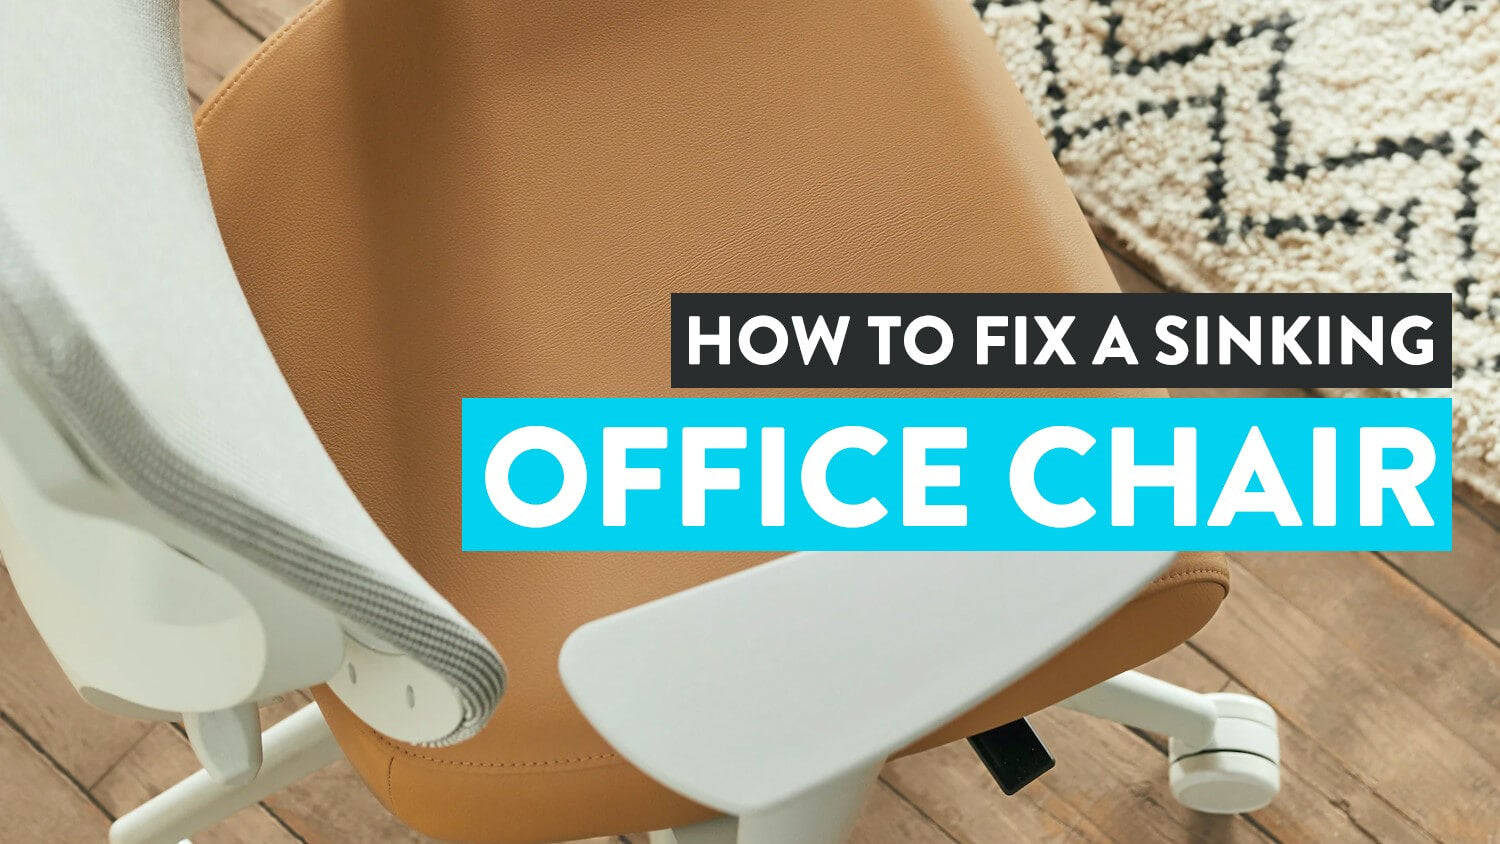 Office Chair Buddy - Fix Your Sinking in Minutes - No Tools